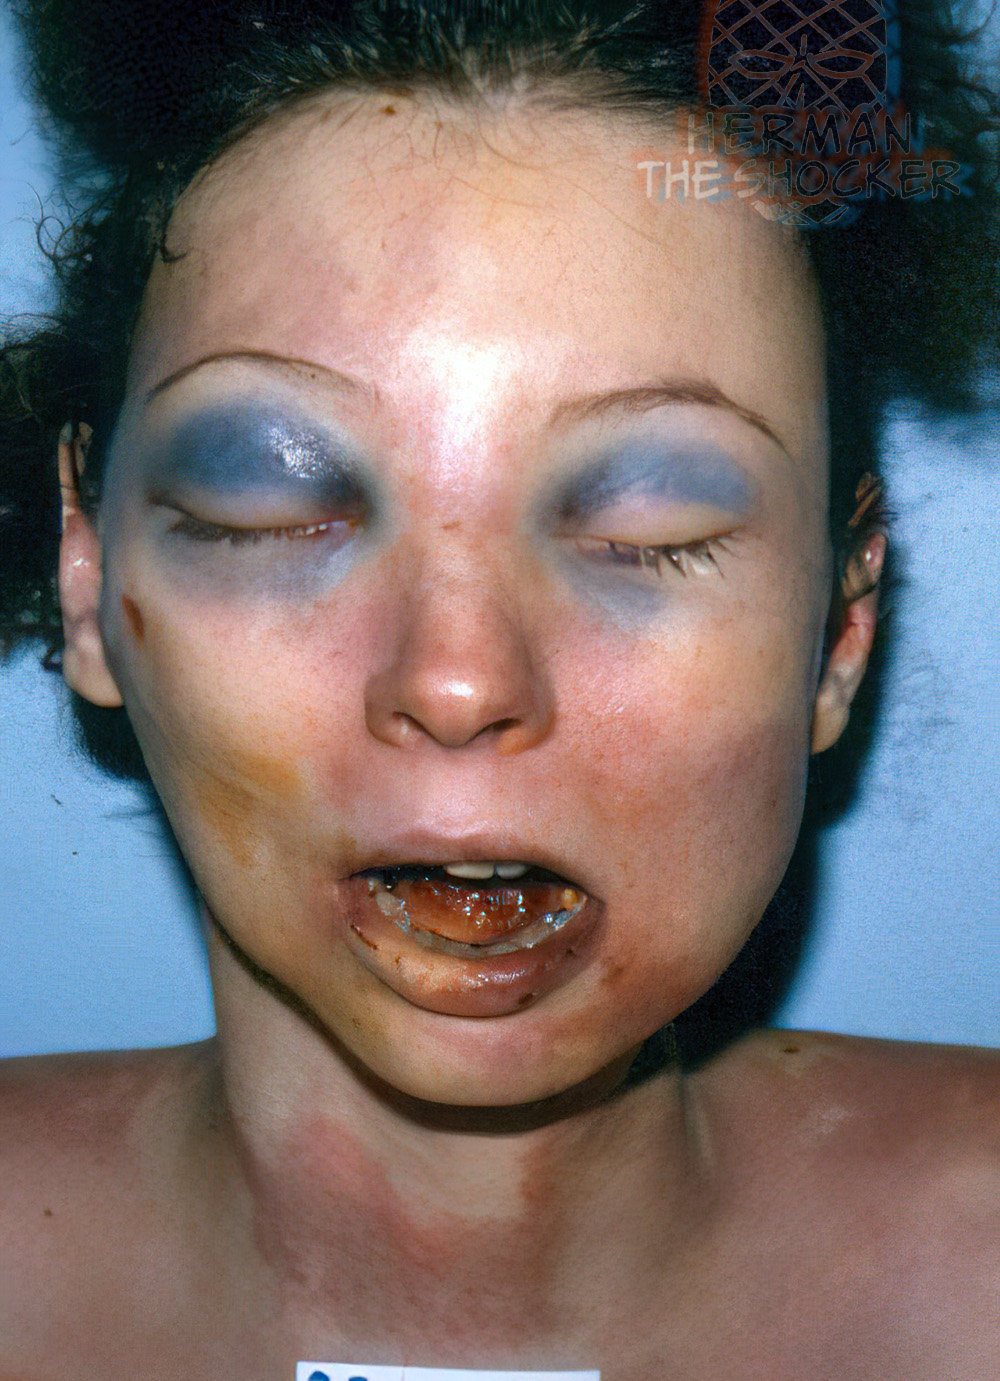 Raccoon eyes on a suicide victim